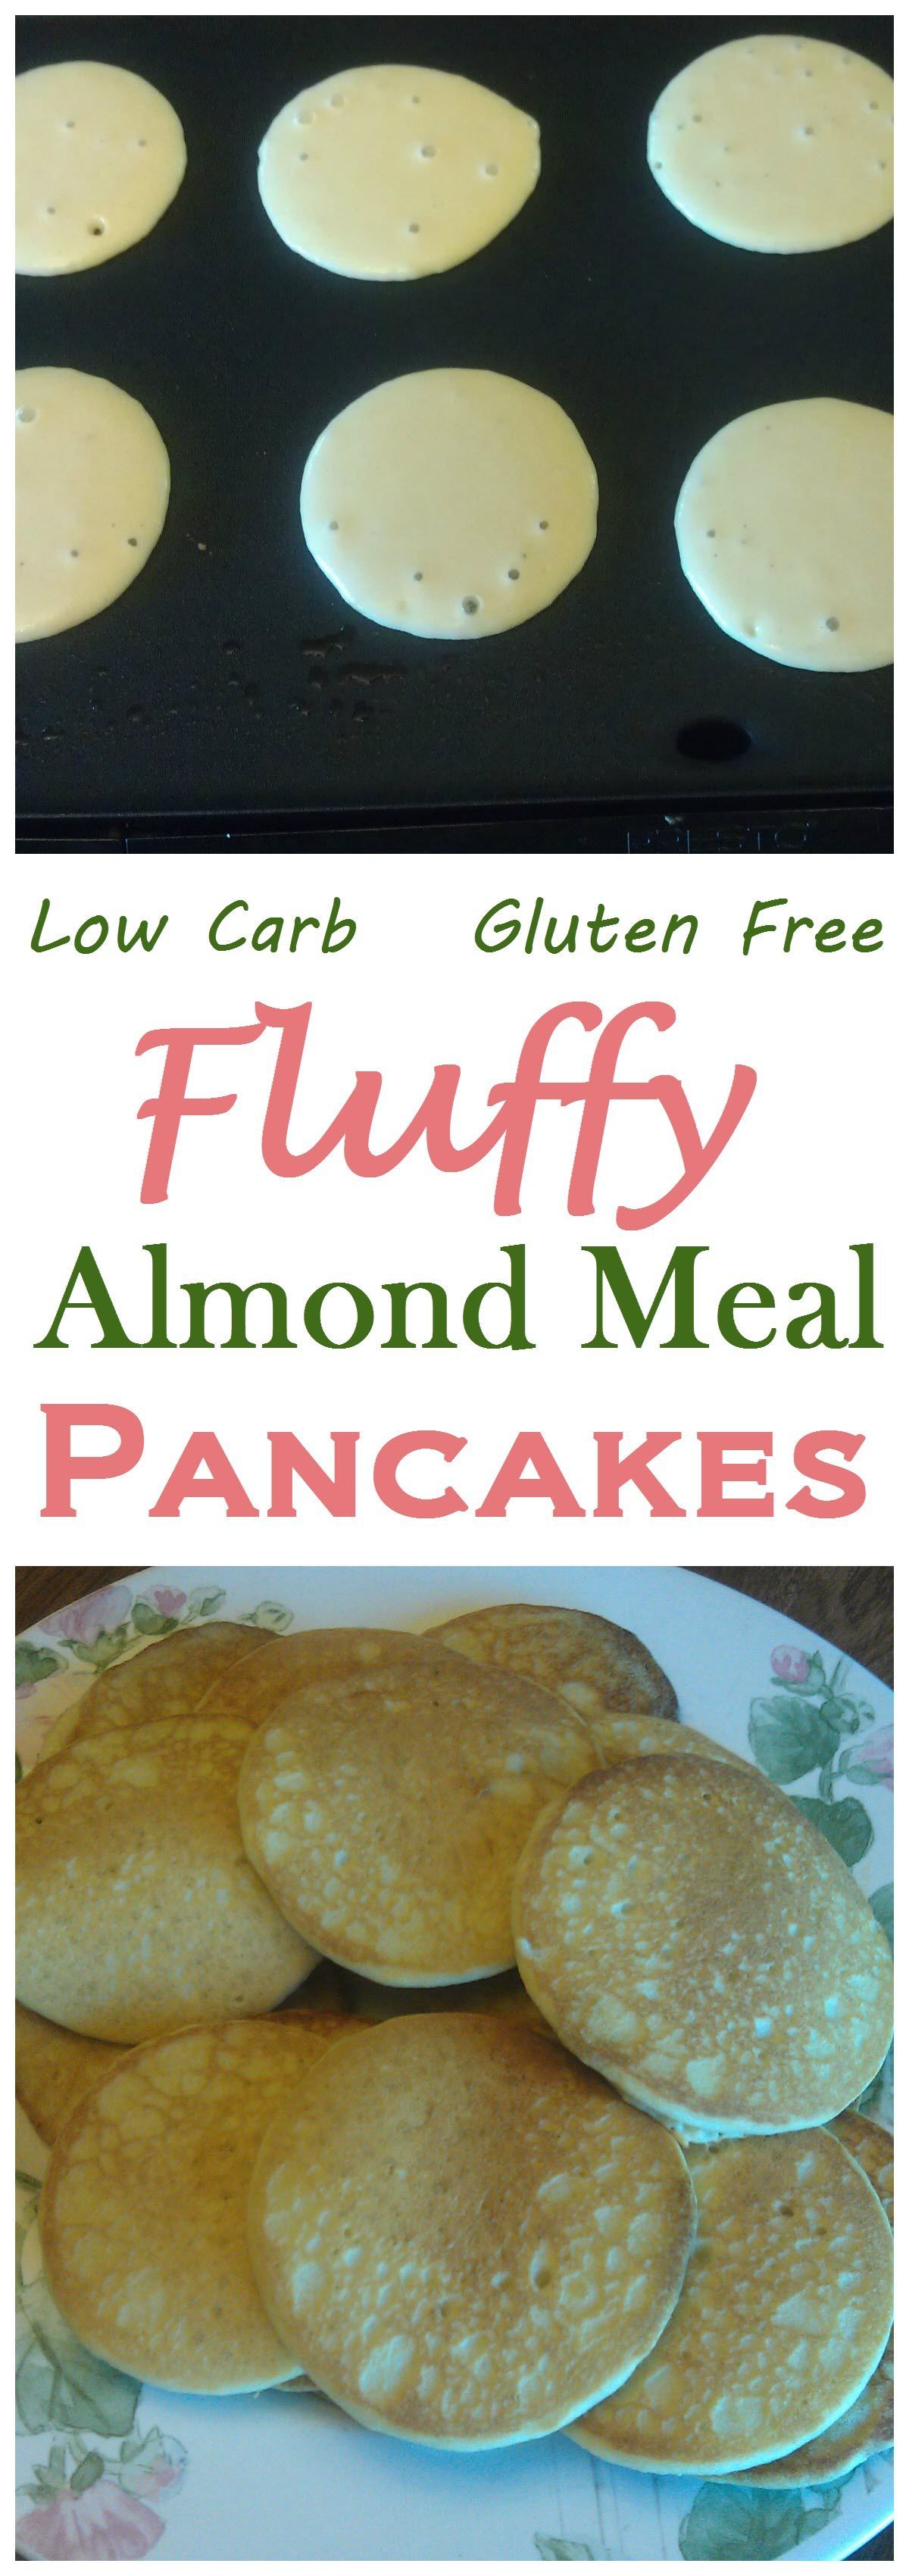 Going to try these minus the sweeter packets. I will probably just sub. Sugar unless someone else has a better suggestion! -   22 low carb pancakes
 ideas